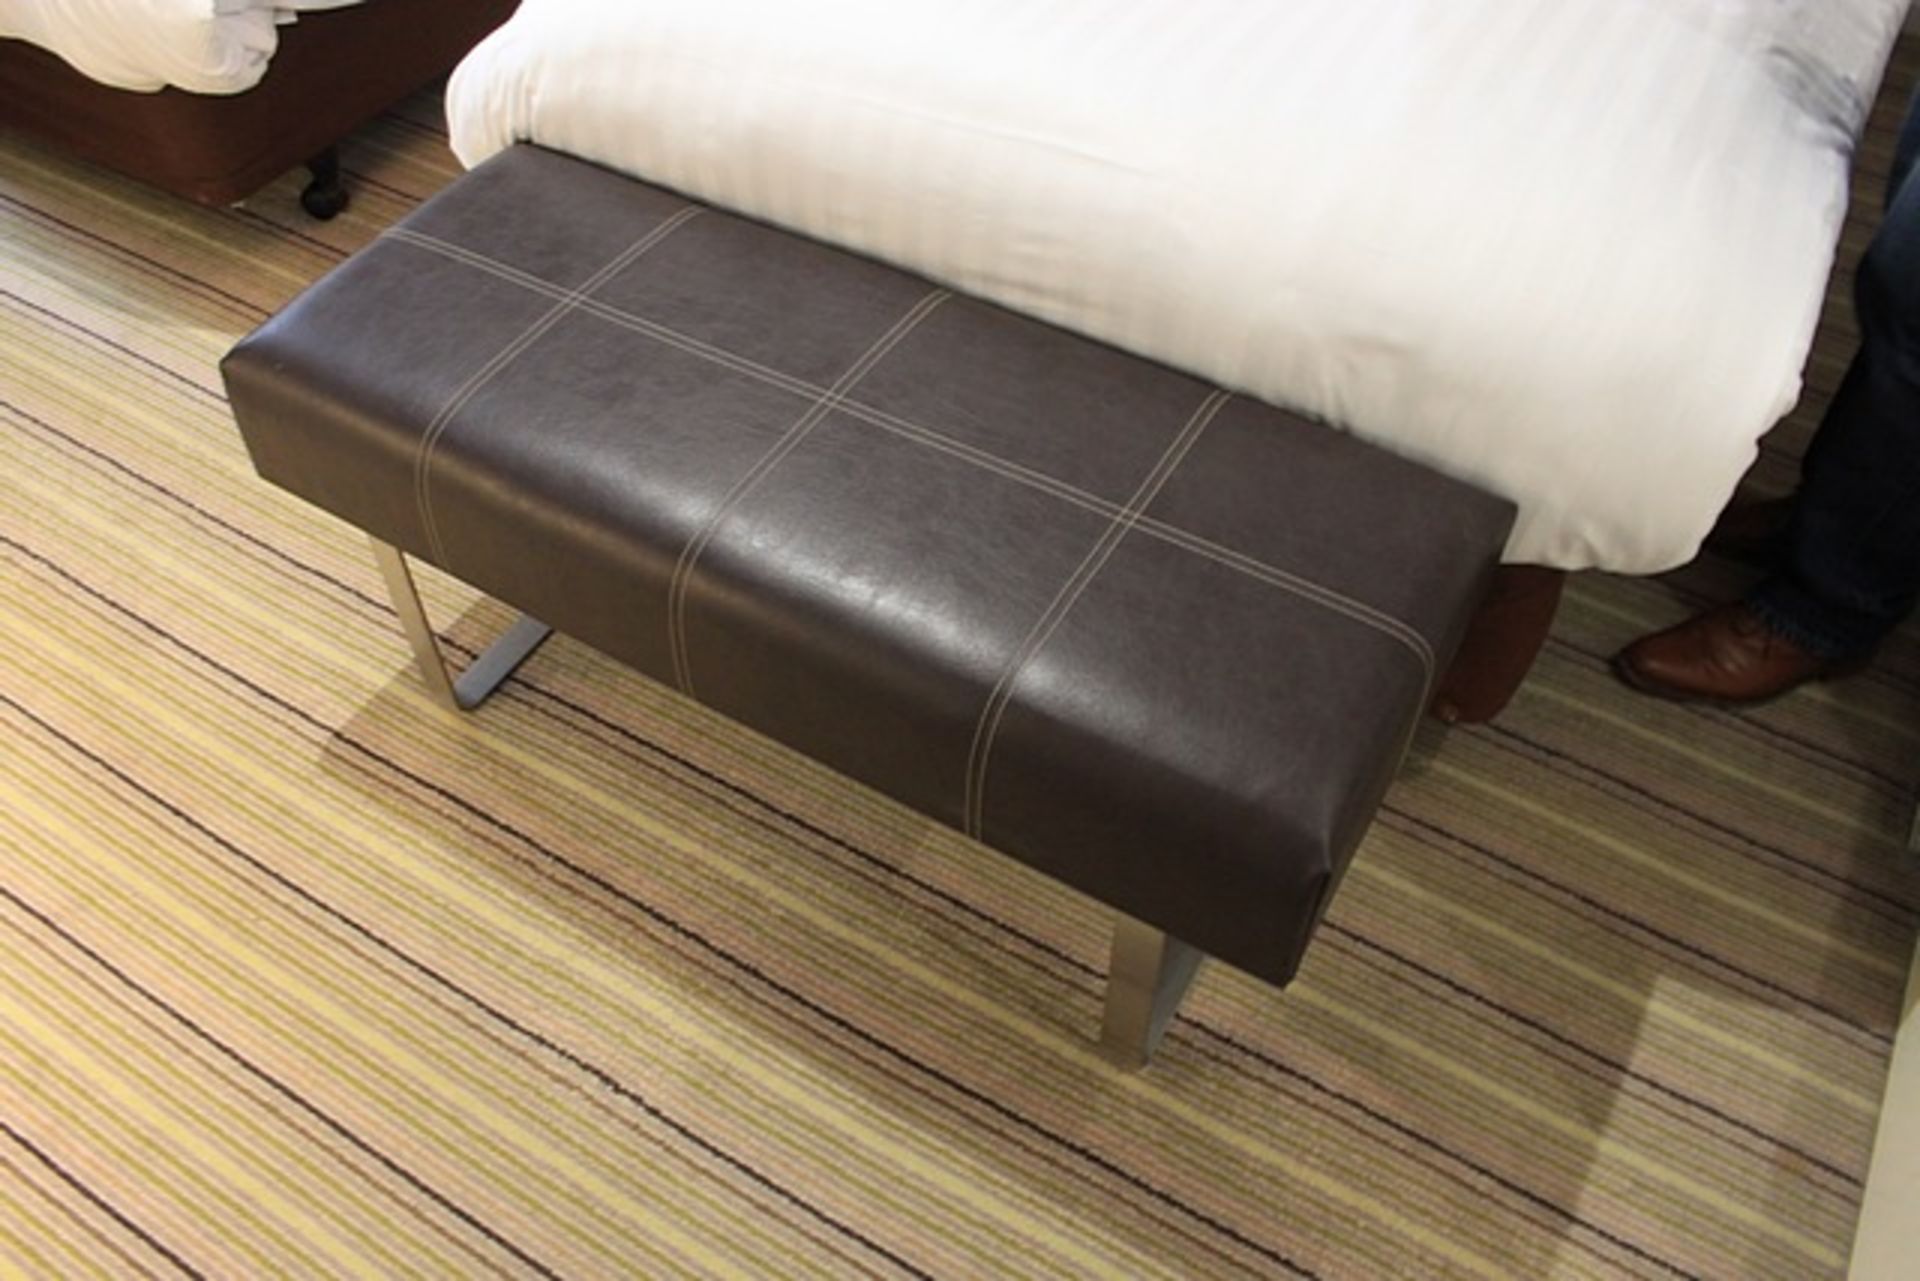 Curtis Contract Furniture stylish contemporary brown Leather stiched top bench with polished steel - Image 4 of 4